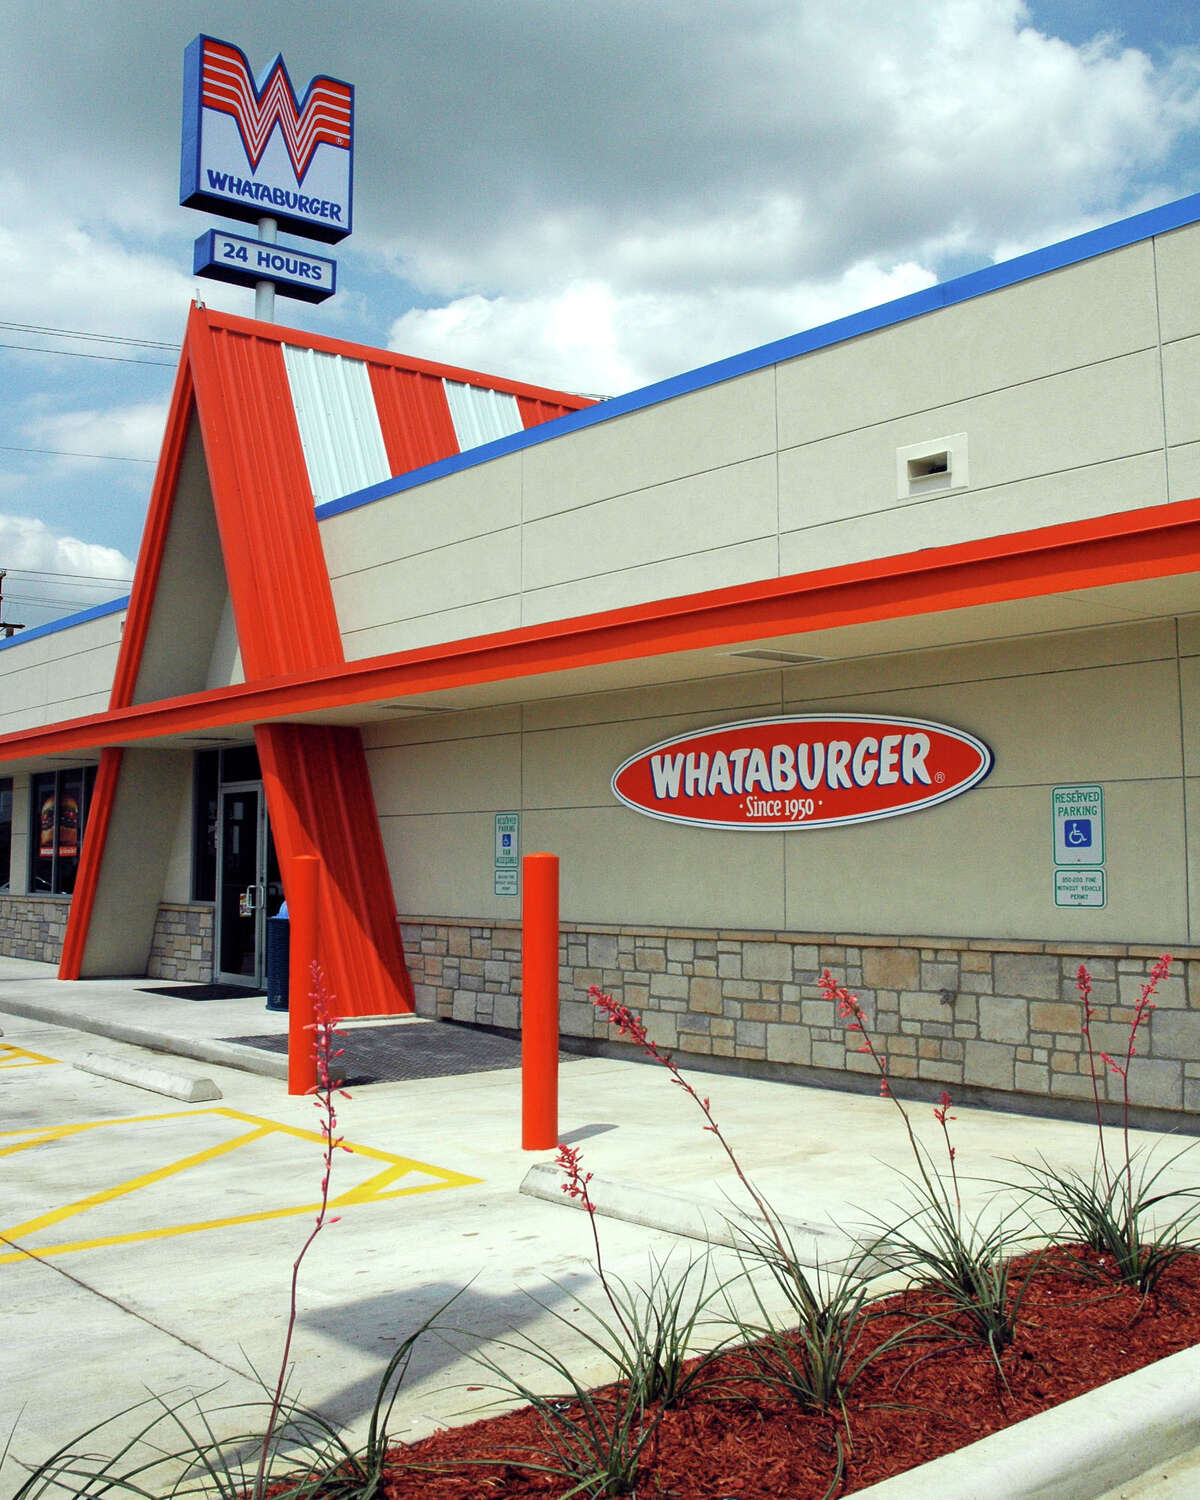 But Whataburger has more stores in more states. There are more than 760 Whataburger restaurants across 10 states: Arizona, Arkansas, Alabama, Florida, Georgia, Louisiana, Mississippi, New Mexico, Oklahoma and of course Texas. In-N-Out has 295 restaurants in five states: California, Nevada, Arizona, Utah and Texas.Score: In-N-Out 1, Whataburger 1